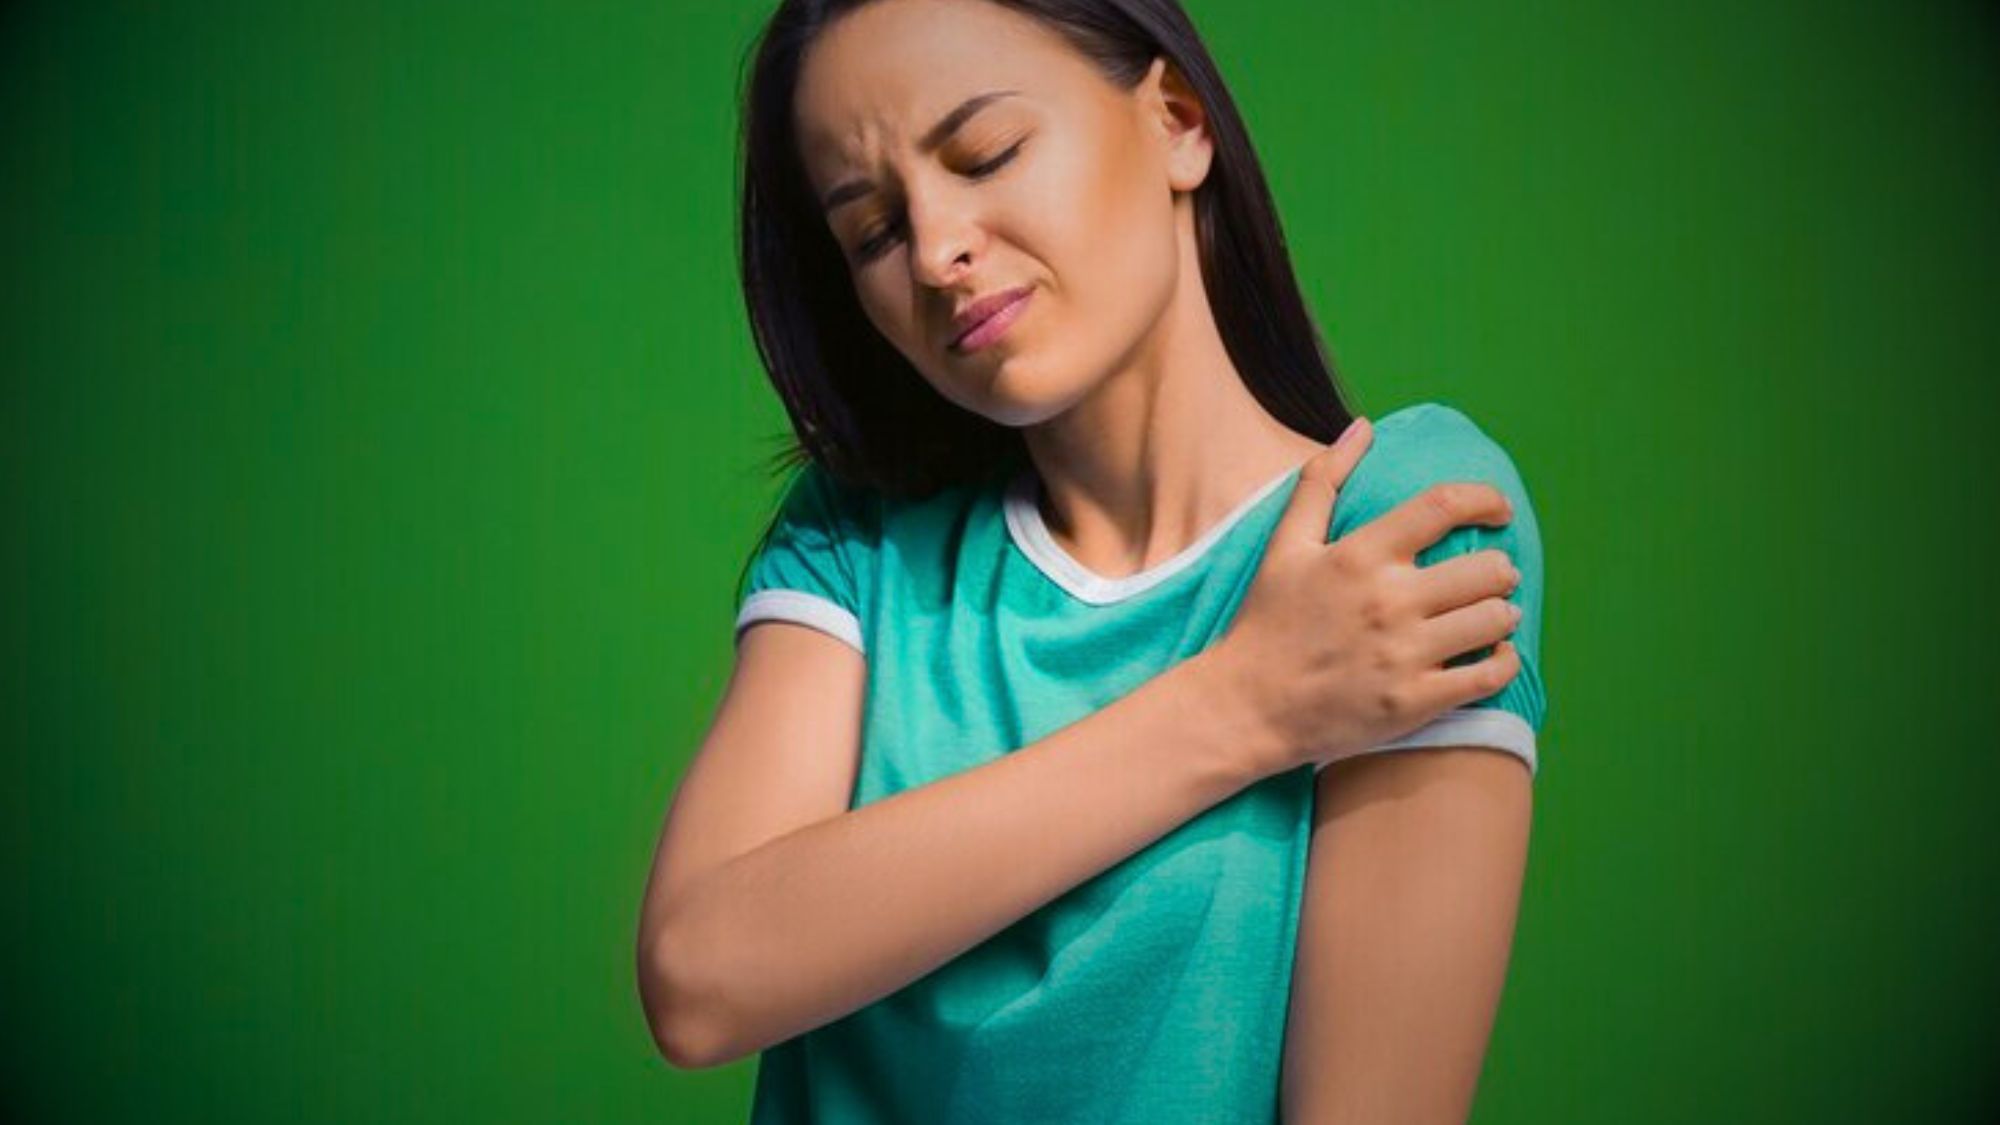 A woman with her arm on her shoulder, expressing chronic shoulder pain